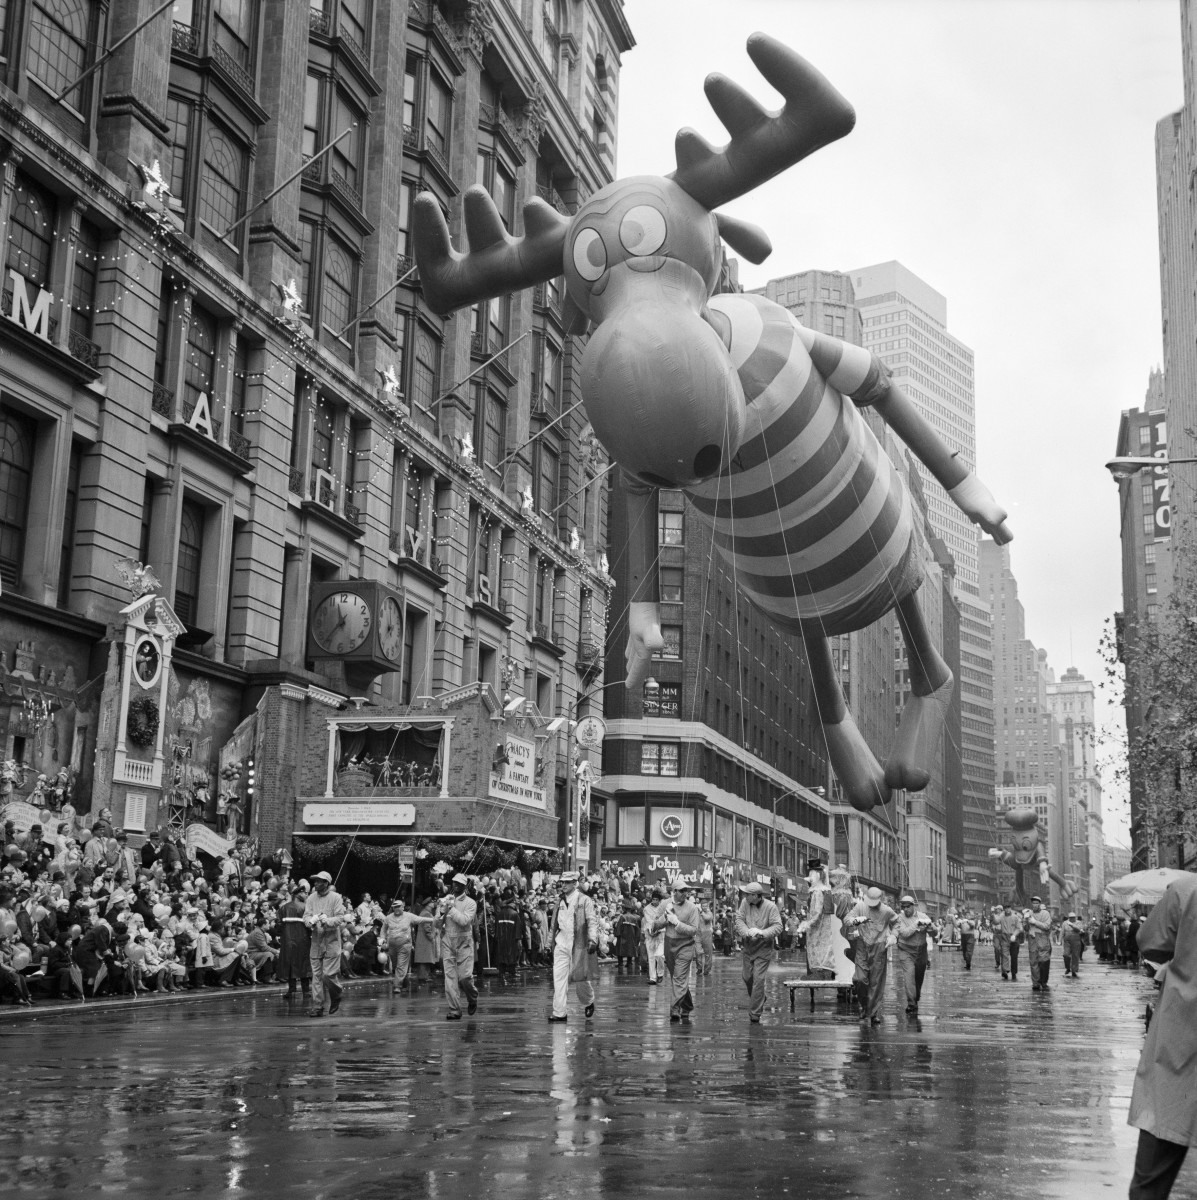 A giant Bullwinkle float looms over the crowd in the 1962 Macy’s Thanksgiving Day Parade. Despite the weather, a large crowd came out to see the parade on a rainy Thanksgiving Day.